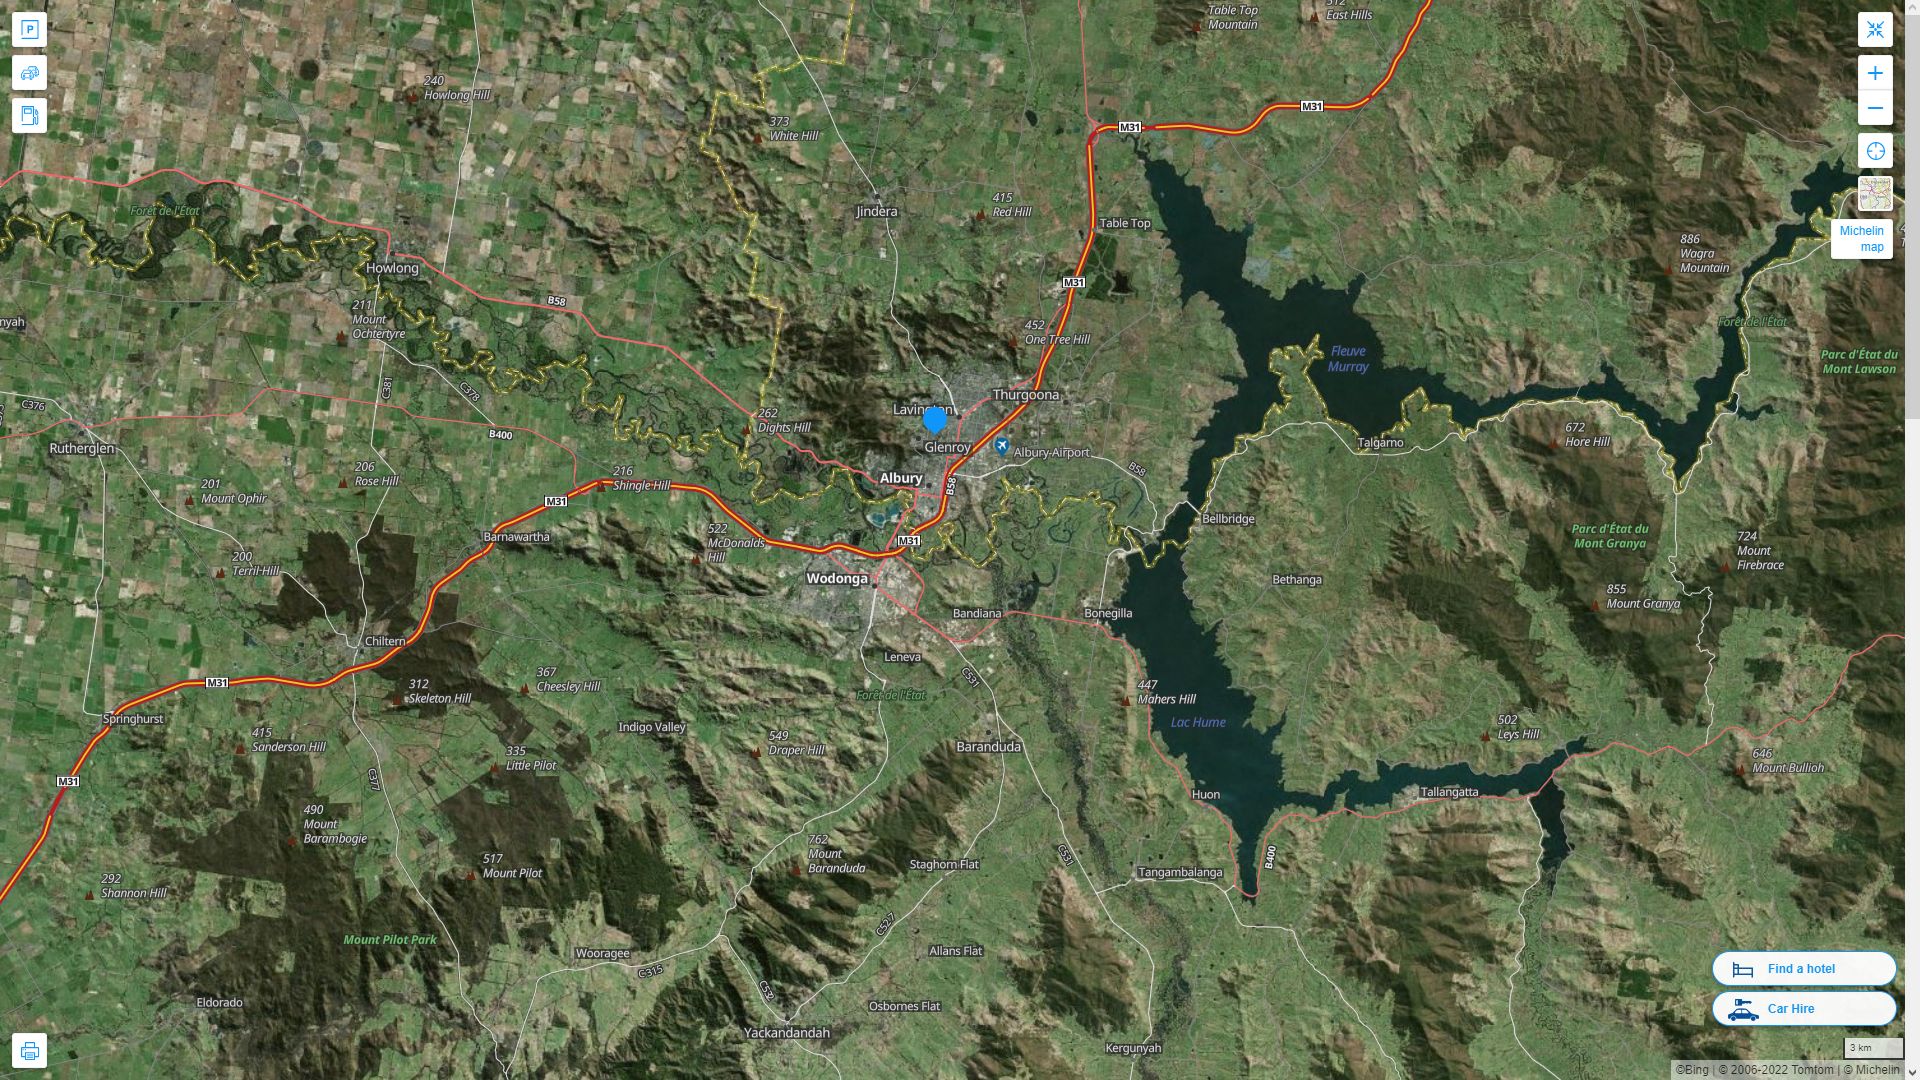 Albury Highway and Road Map with Satellite View